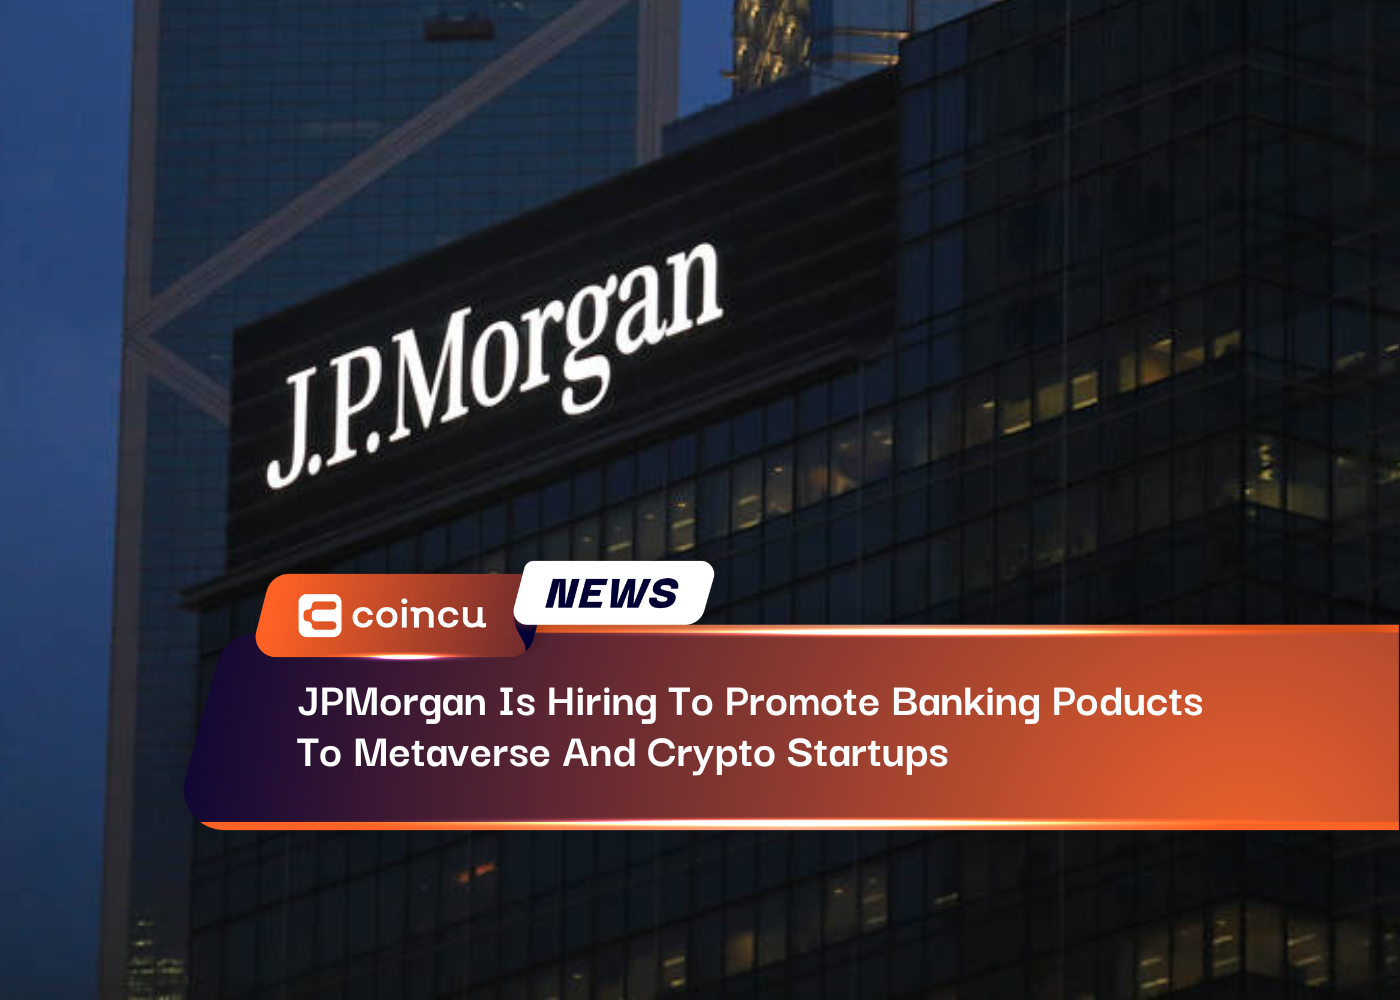 JPMorgan Is Hiring To Promote Banking Poducts